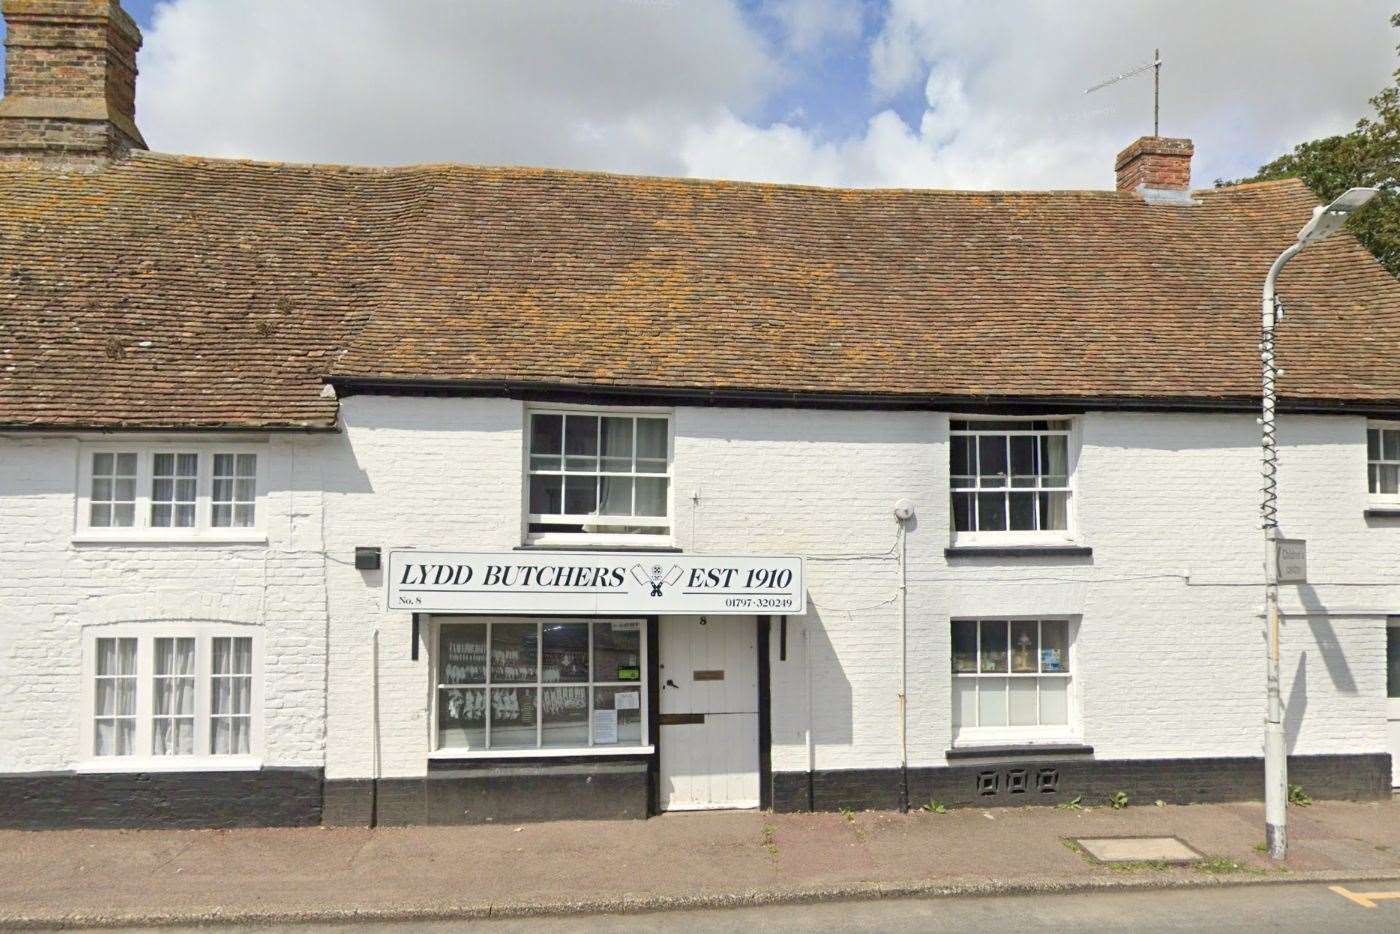 The site of Lydd Butchers in the town's High Street will be redeveloped as a five-bedroom house. Picture: Google Maps